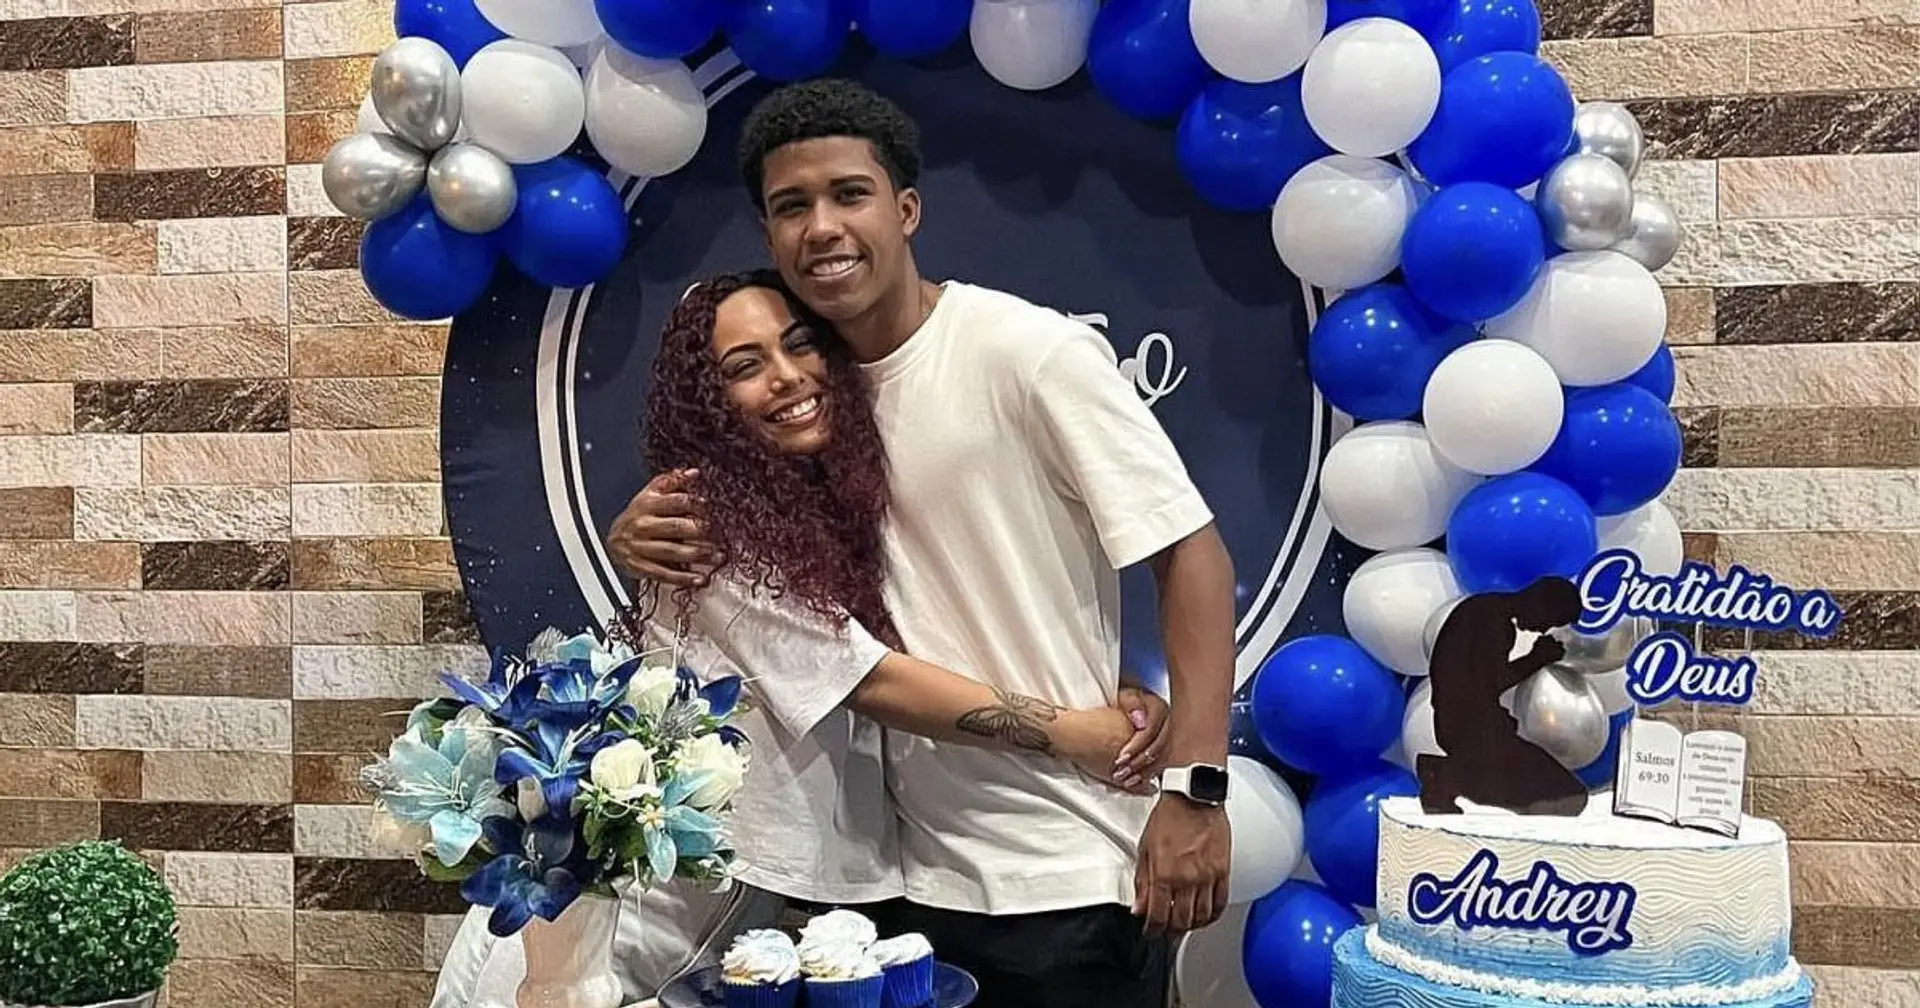 All in blue: Andres Santos throws party to celebrate Chelsea move